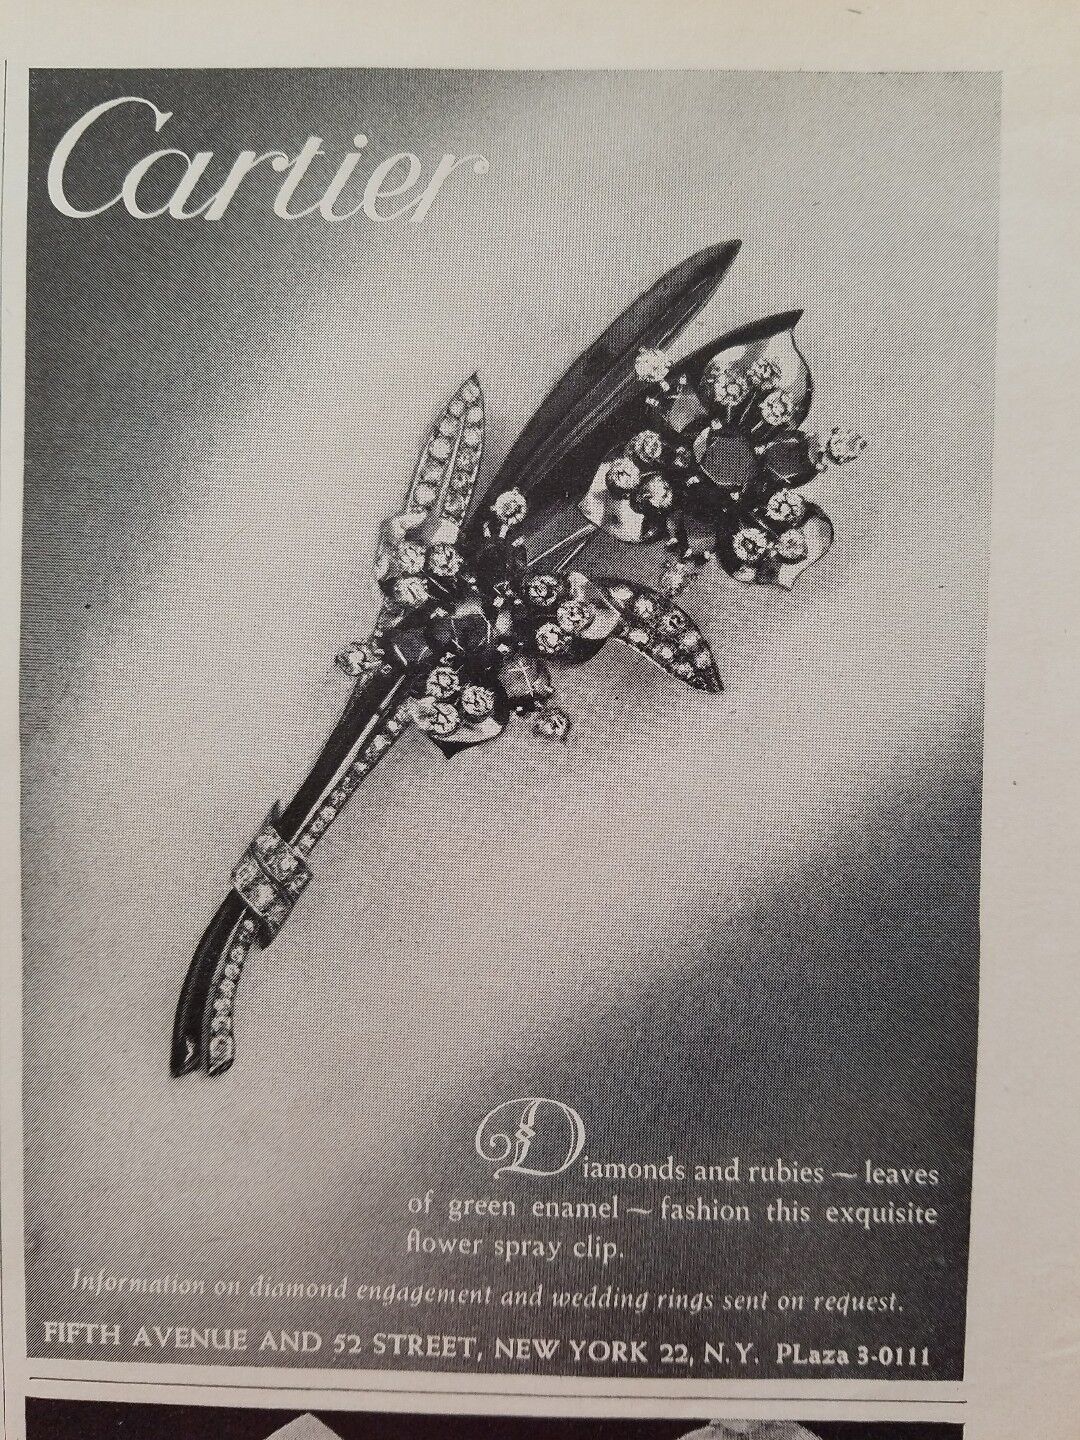 1942 Cartier colors of Victory Jewels jewelry powder compact brooch ring ad